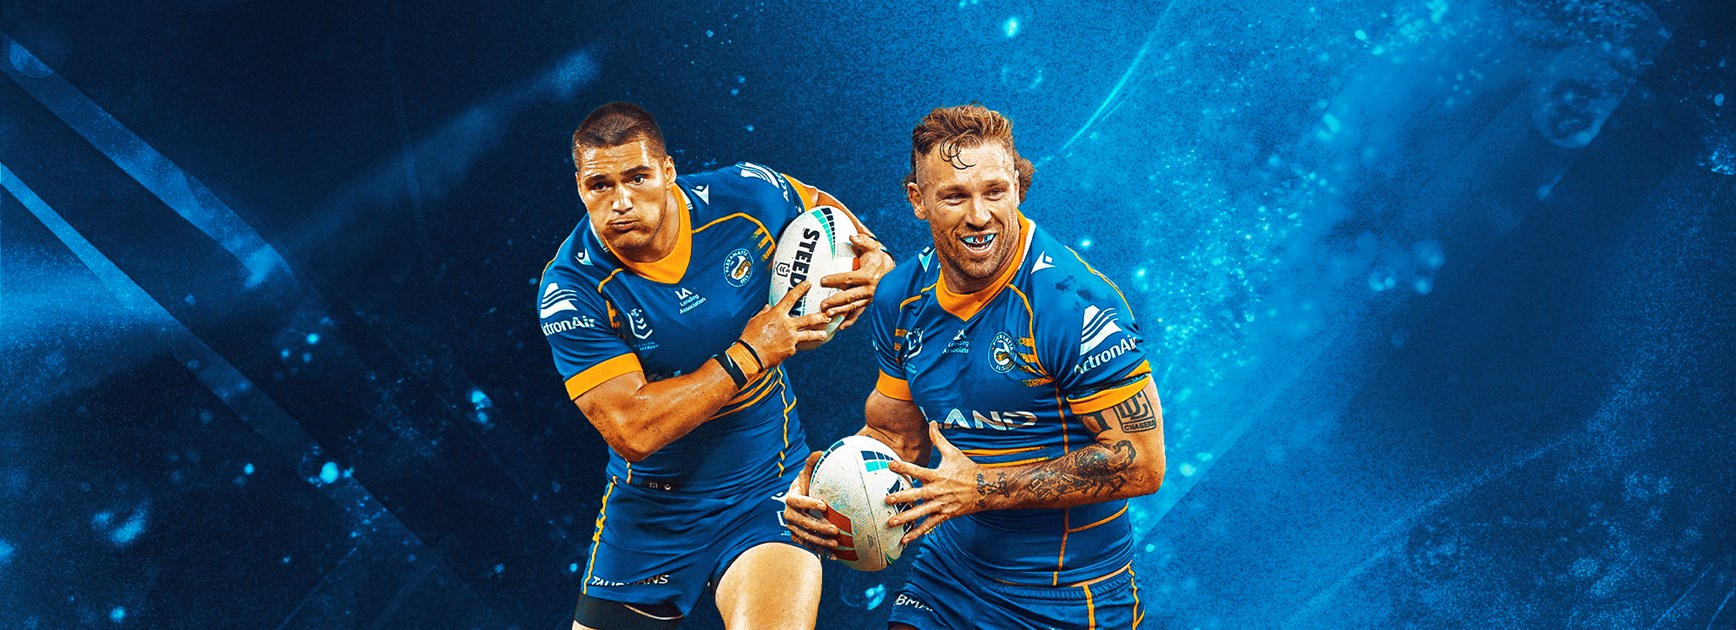 Bryce Cartwright and Wiremu Greig extend with Eels